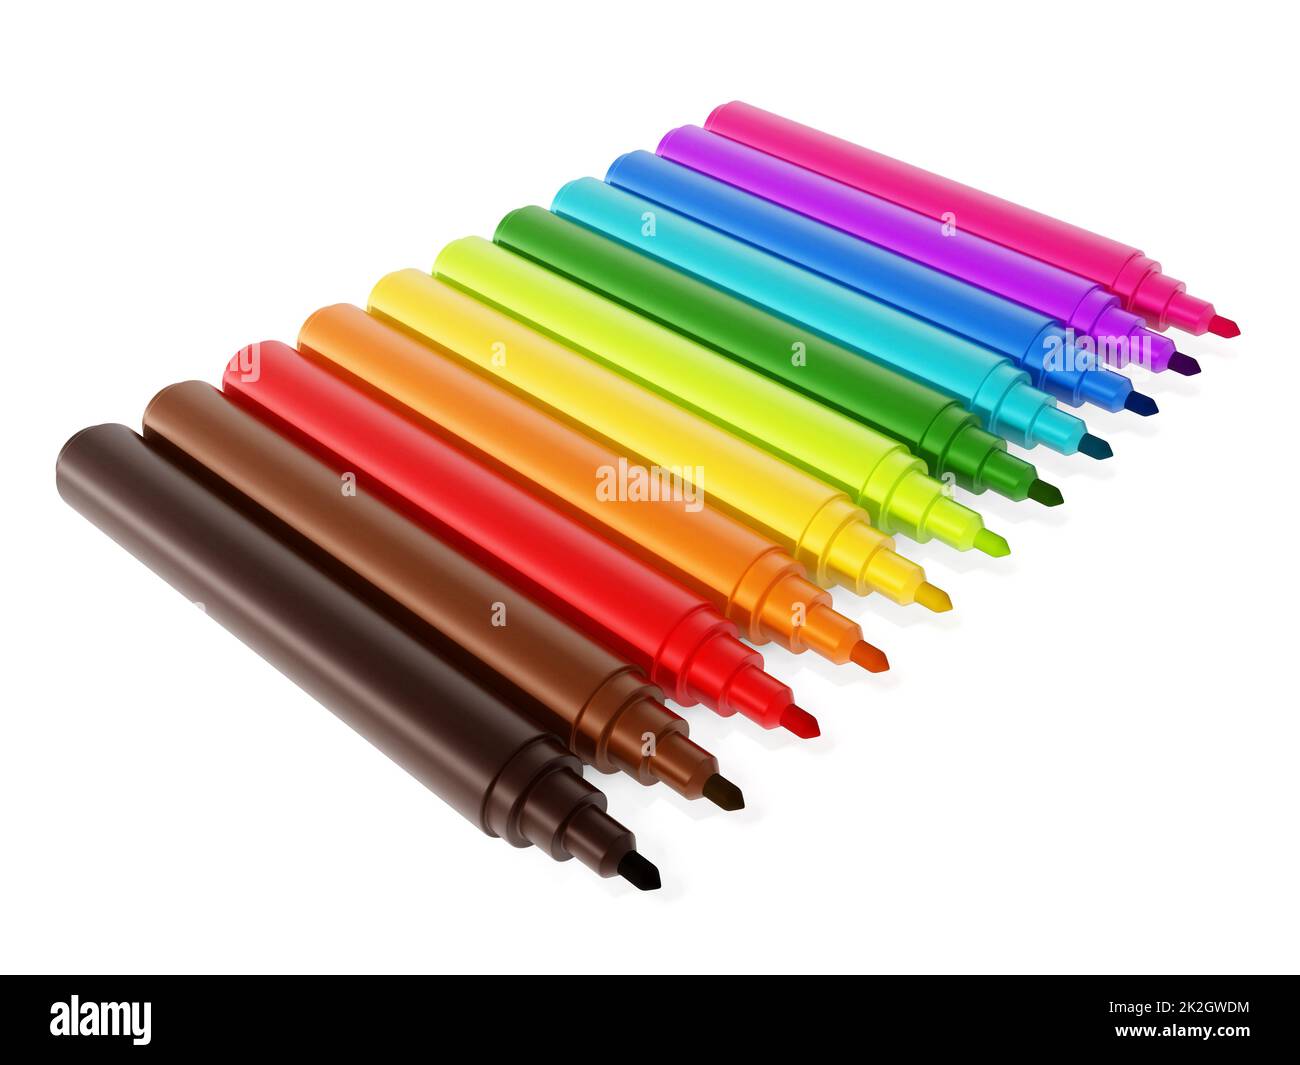 390+ Thousand Color Markers Royalty-Free Images, Stock Photos